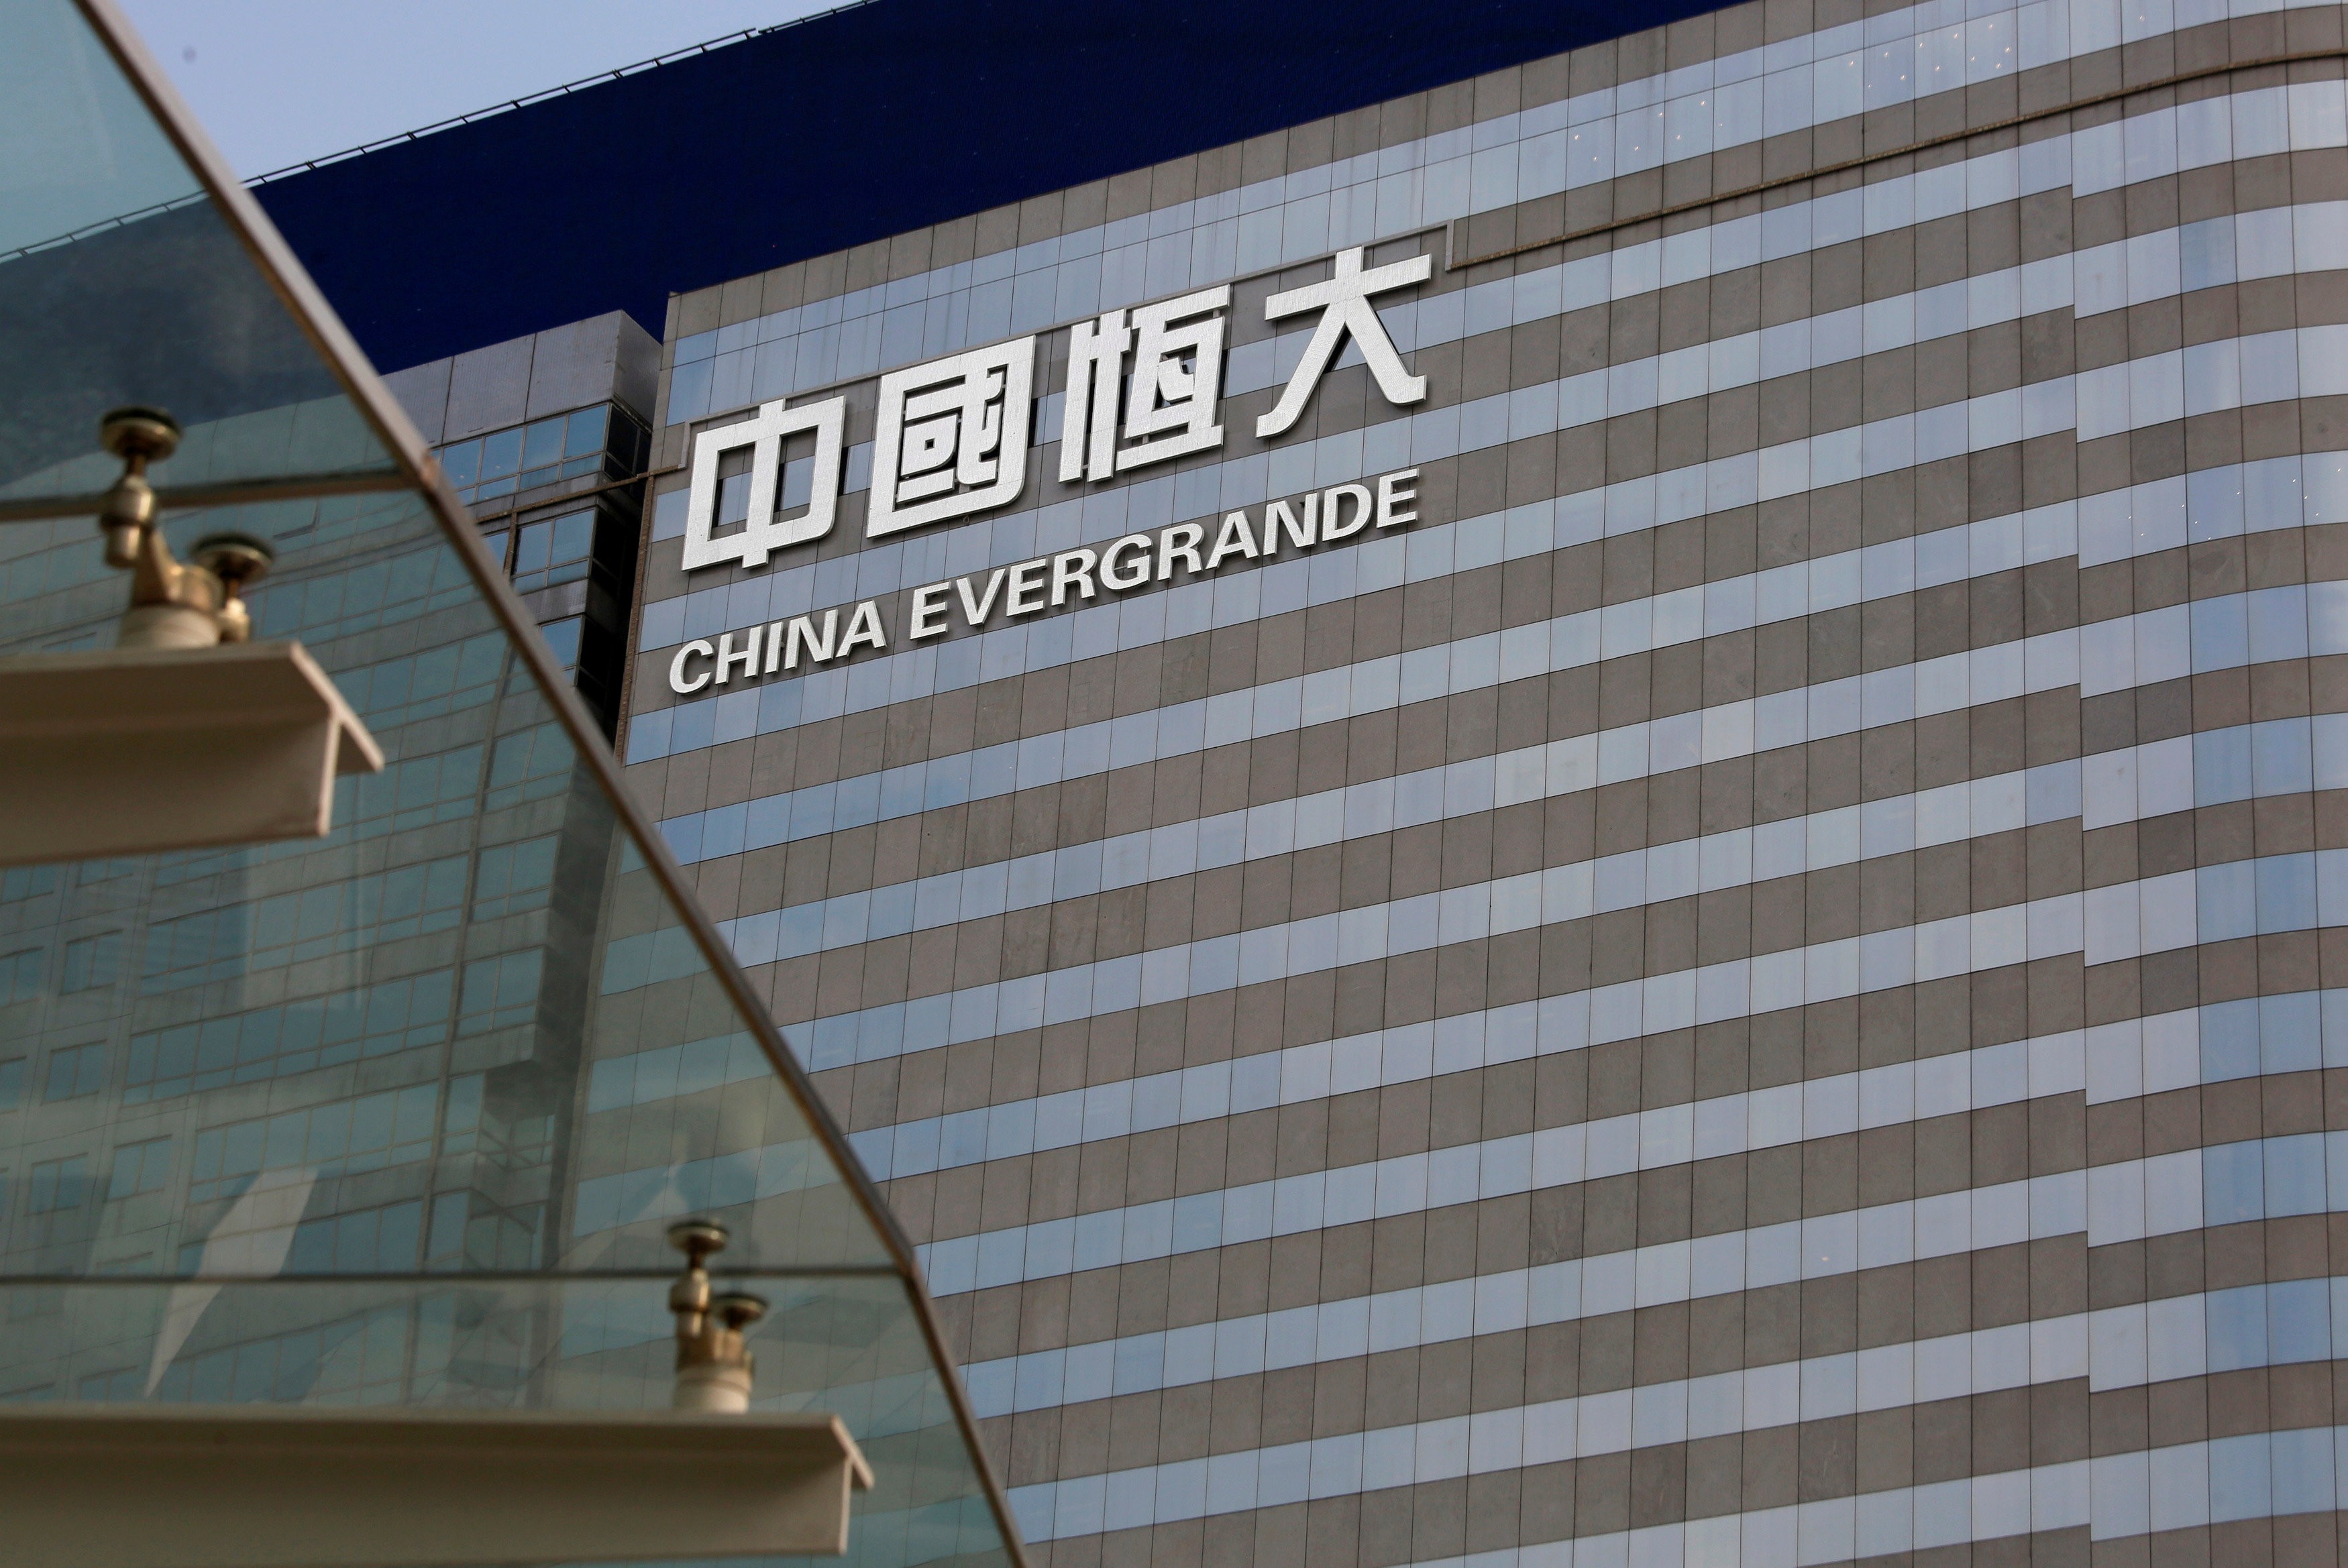 China Evergrande was the biggest donor among Hong Kong-listed property companies last year. Photo: Reuters